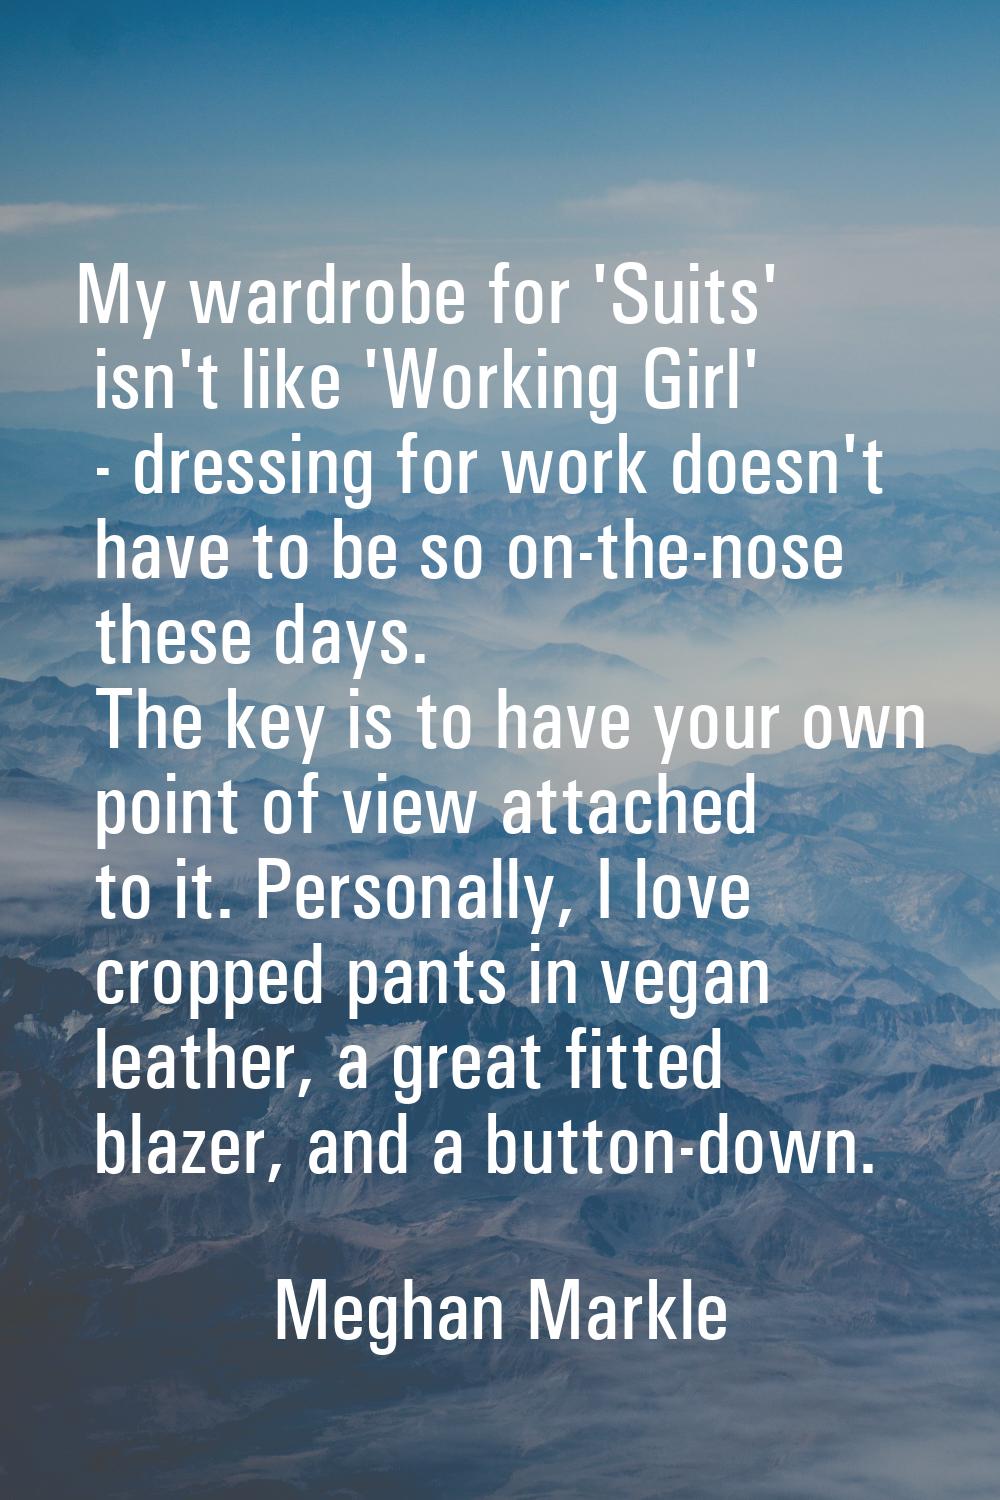 My wardrobe for 'Suits' isn't like 'Working Girl' - dressing for work doesn't have to be so on-the-